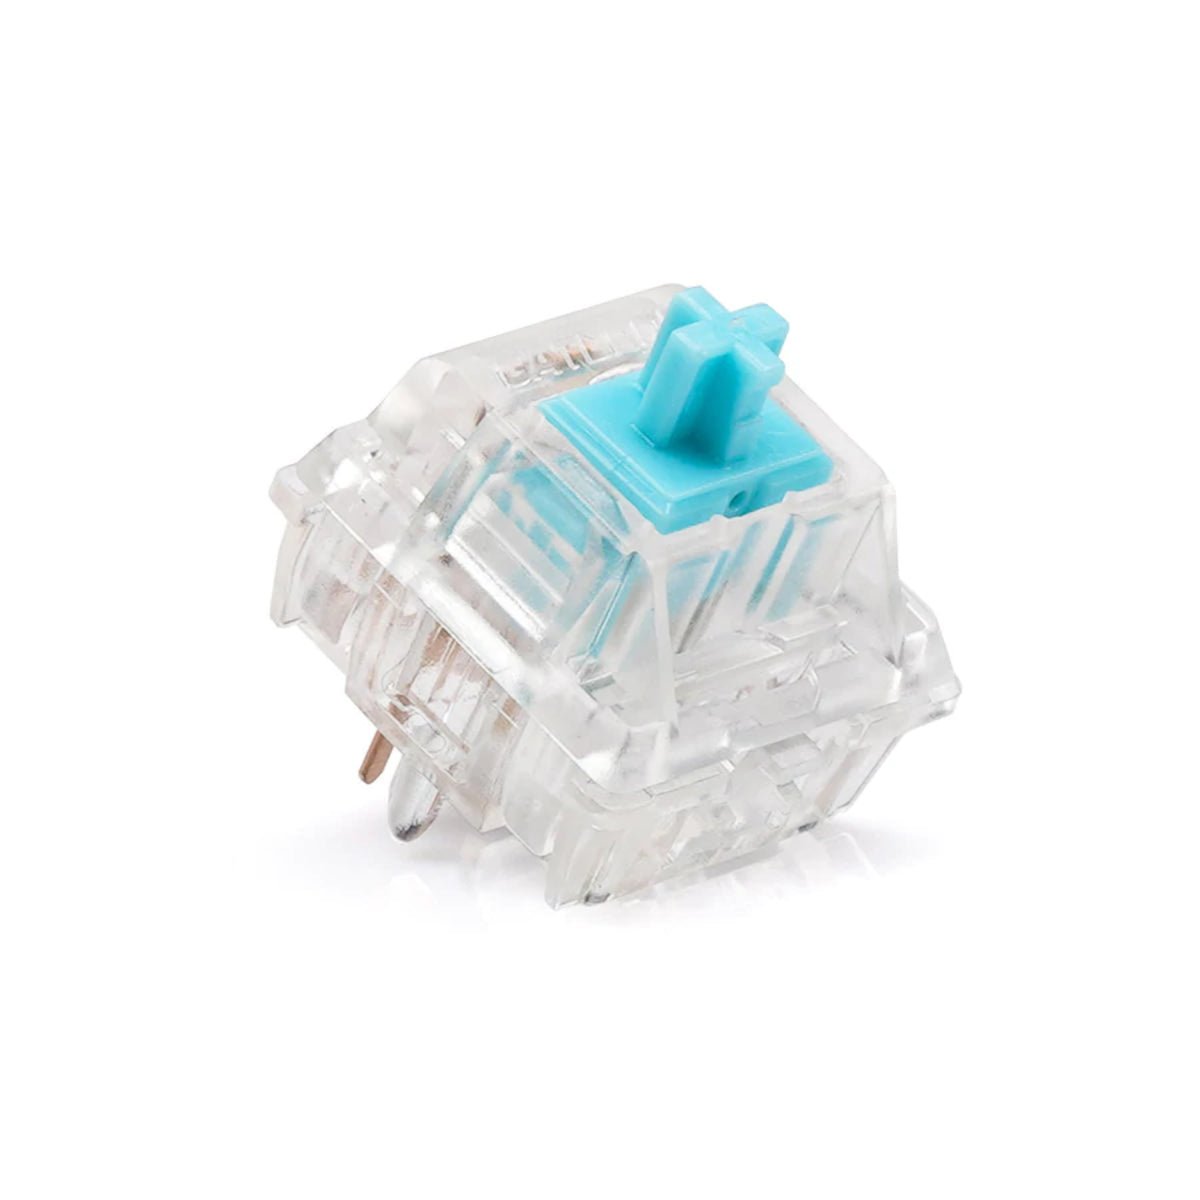 KBD Fans Zeal V2 Tactile Switches 62g - Zilents - Store 974 | ستور ٩٧٤